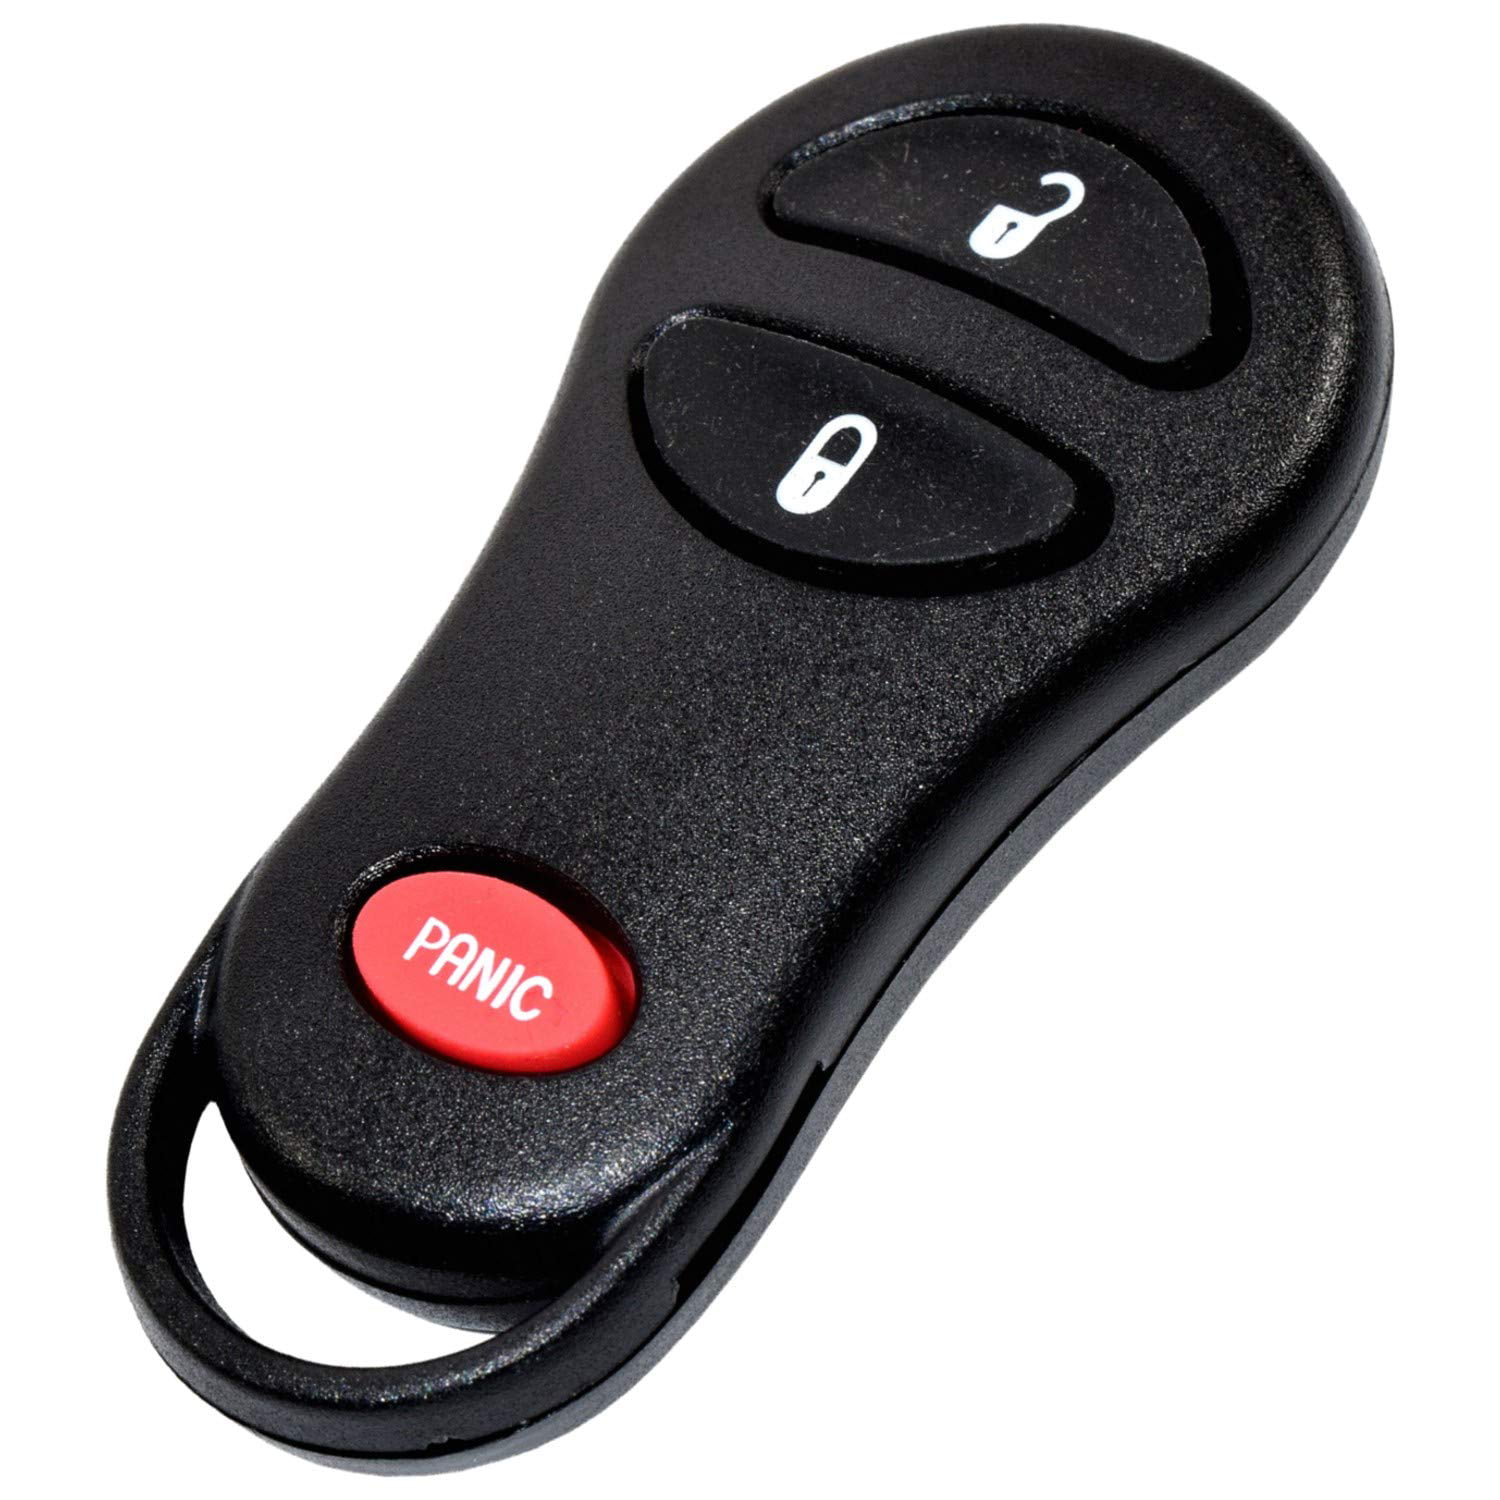 Replacement for Chrysler 1998-2000 300M Concorde Remote Car Keyless Entry Fob 